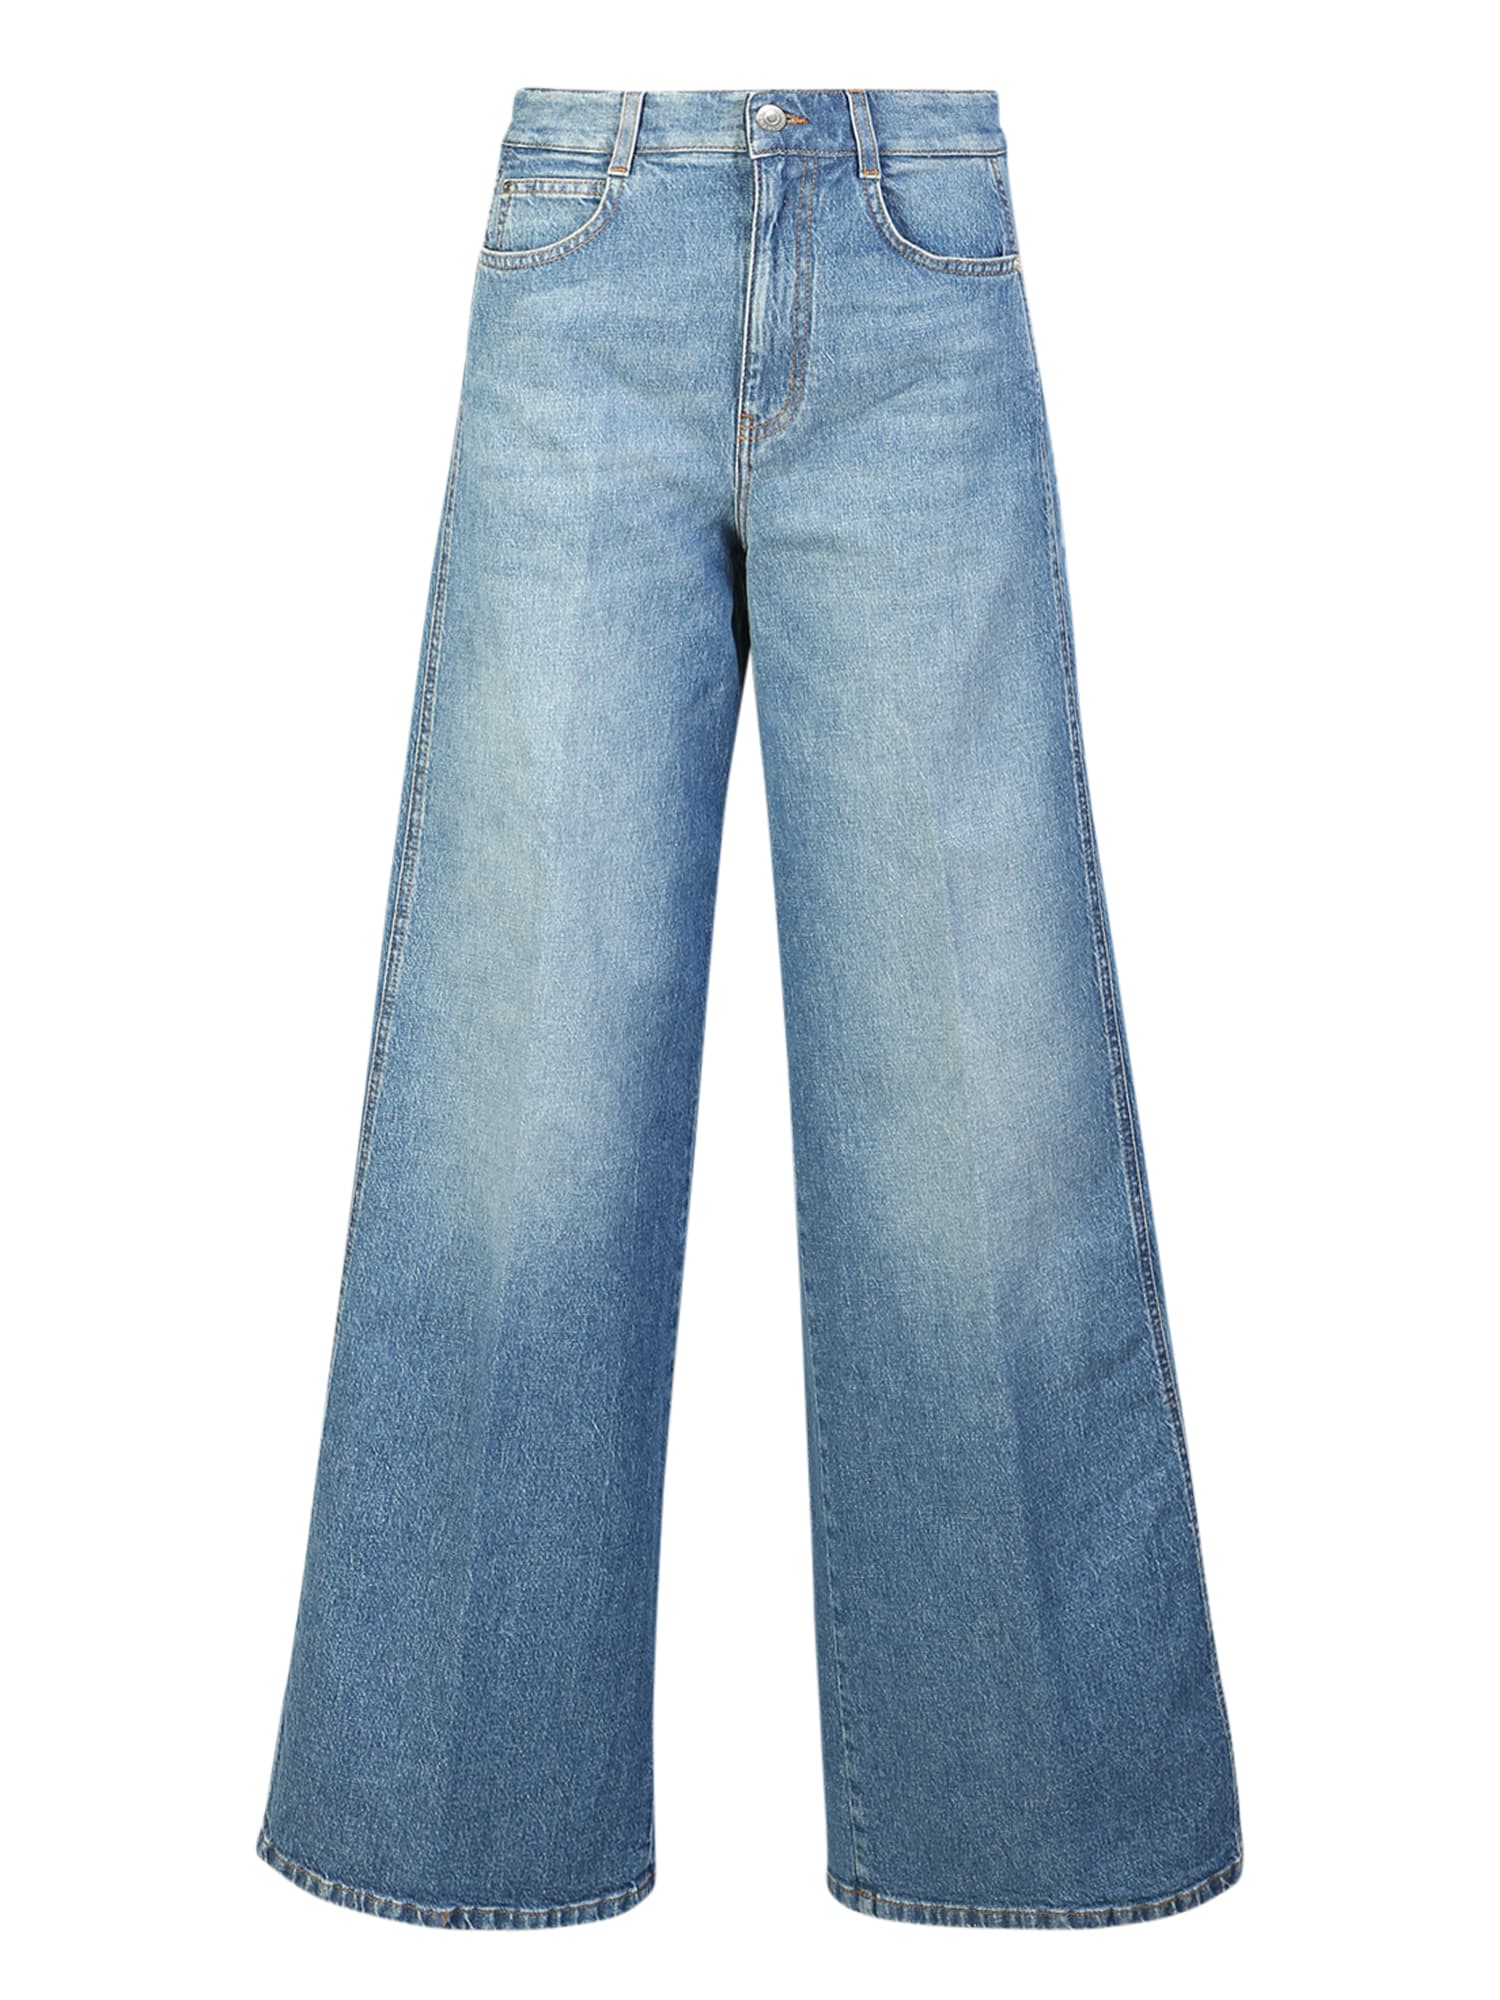 These Wide-leg Jeans By Stella Mccartney With Logo Printed On The Sides Are Produced In Italy, Always Following The Ethics Of Sustainability